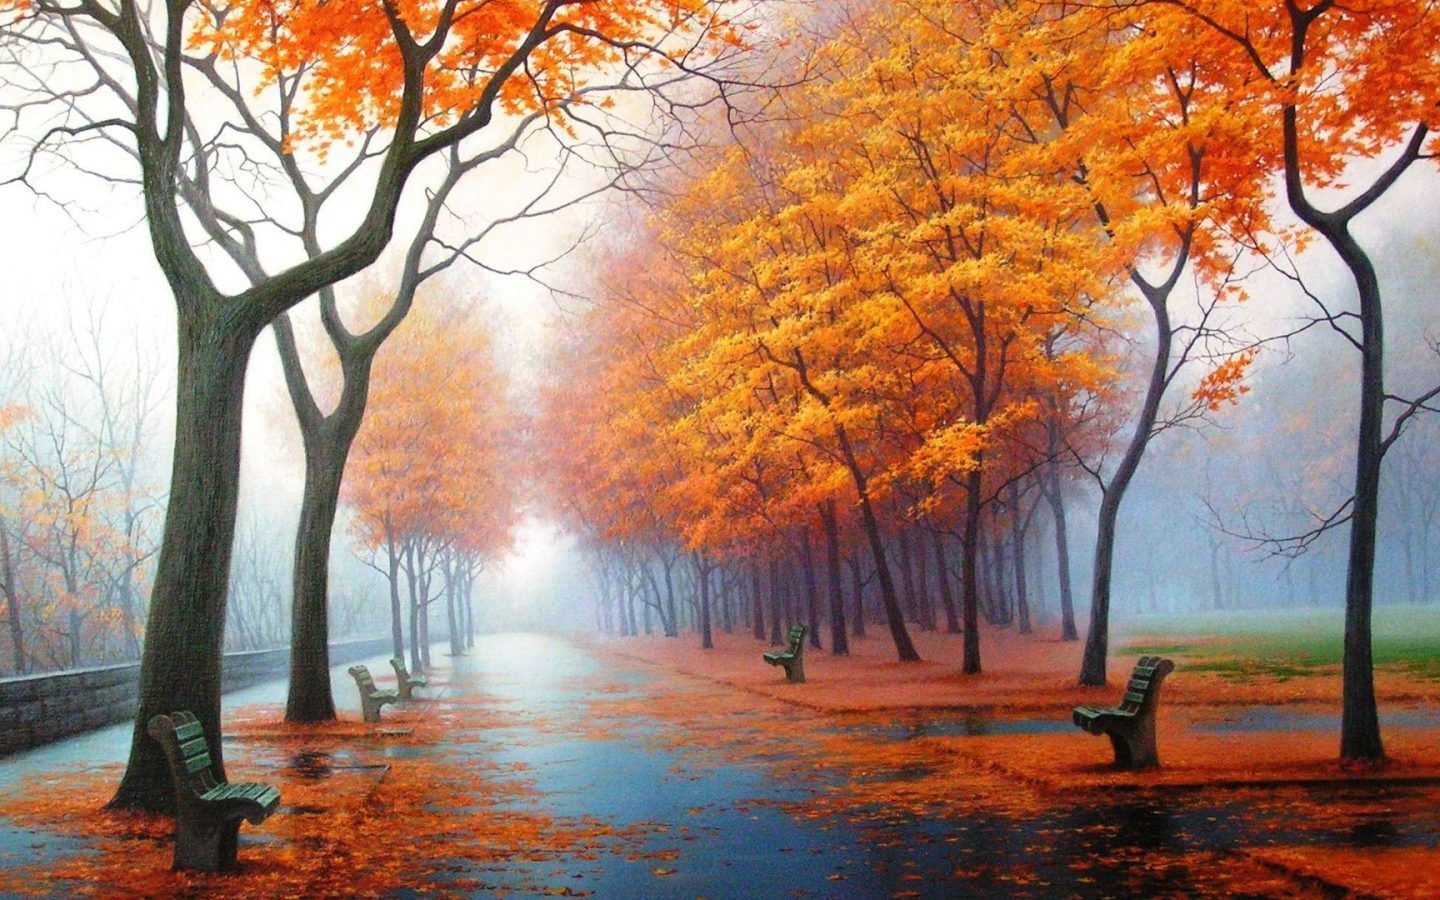 Awesome Nature Mobile Wallpaper. Wall art canvas painting, Paint by number, Autumn nature